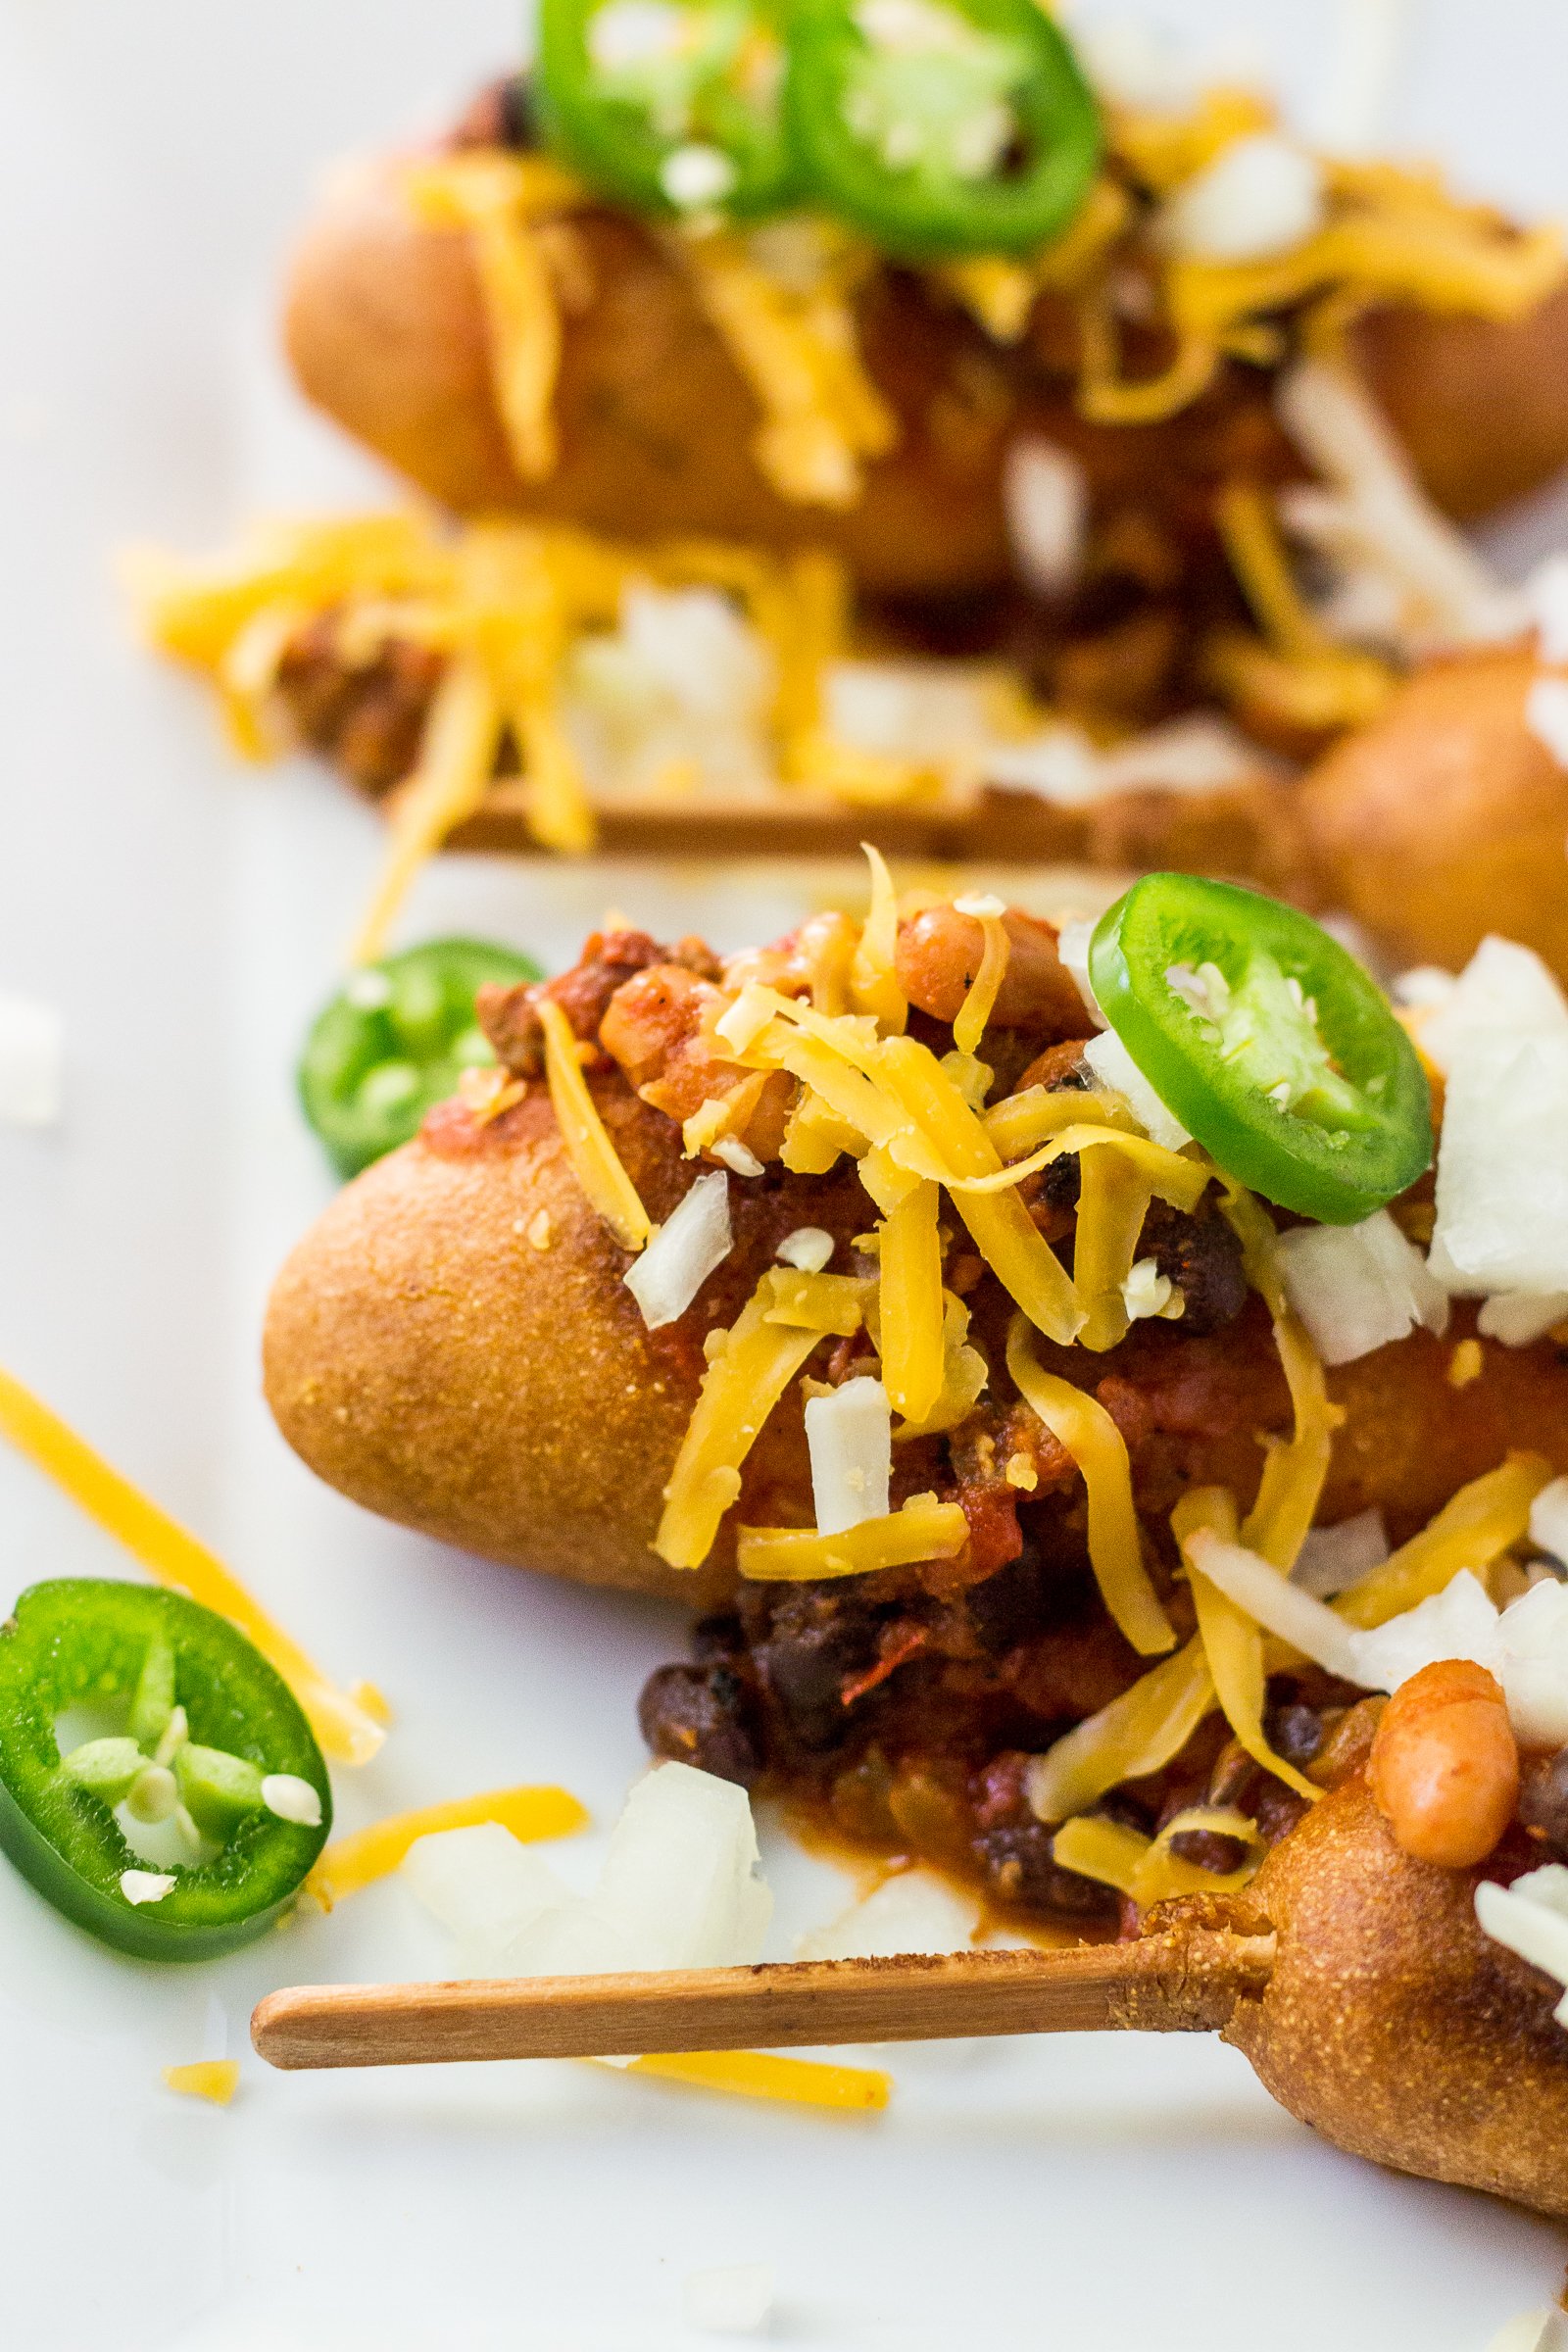 johnsonville, johnsonville corn dogs, johnsonville sausage, what to do with chili leftovers, how to make chili